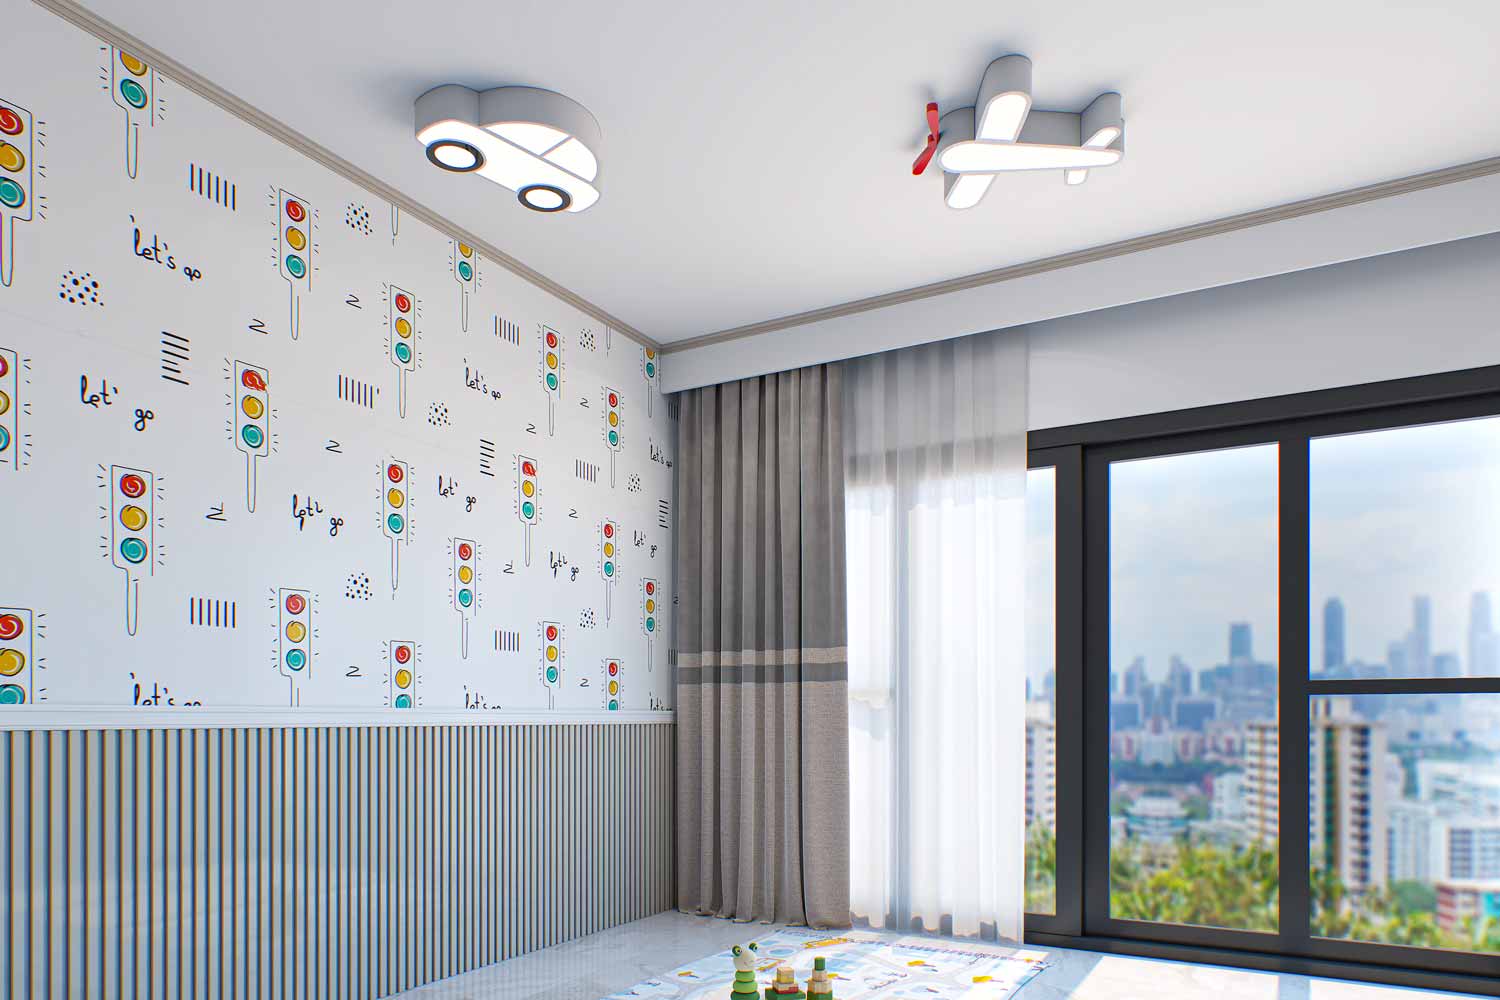 Child's room with car and airplane-themed lighting fixtures on a ceiling adorned with a traffic light road motif design by Magical Nest.